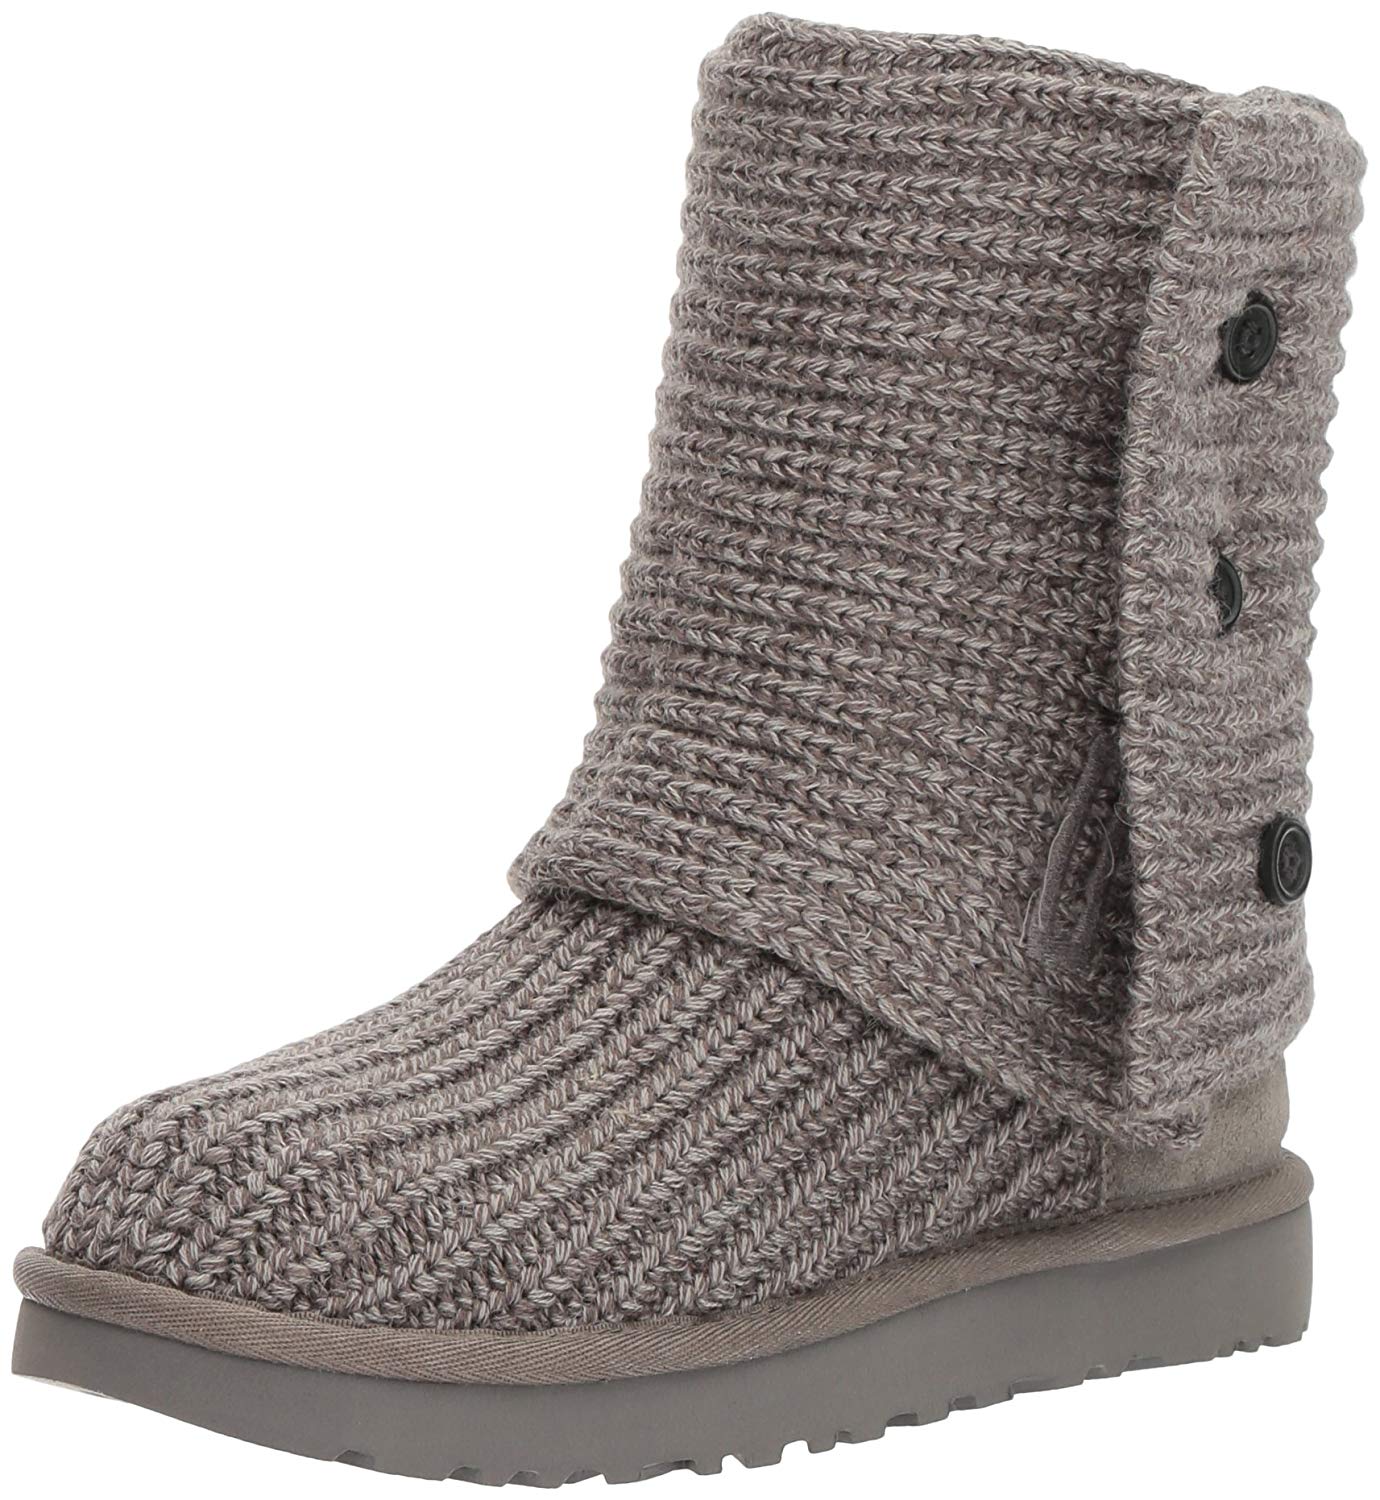 grey knitted ugg boots